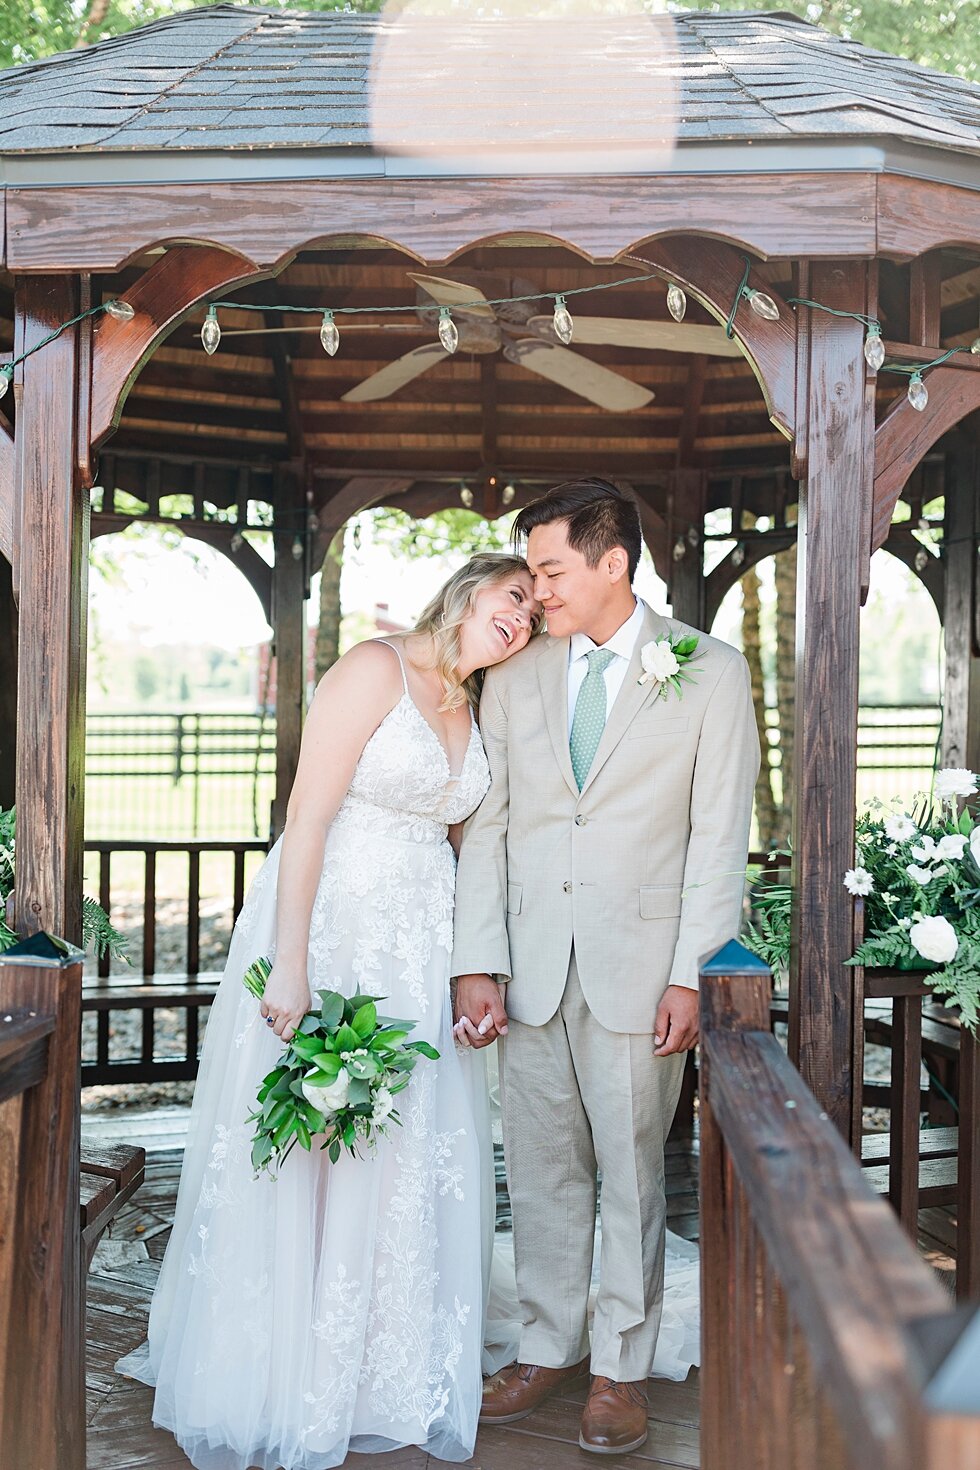  Stunning white flowers with greenery and the neutral color palette for their theme was a great match for this couple. Romantic casual lace wedding gown close friends neutral colors background wedding natural greenery crisp white #midwestphotographer